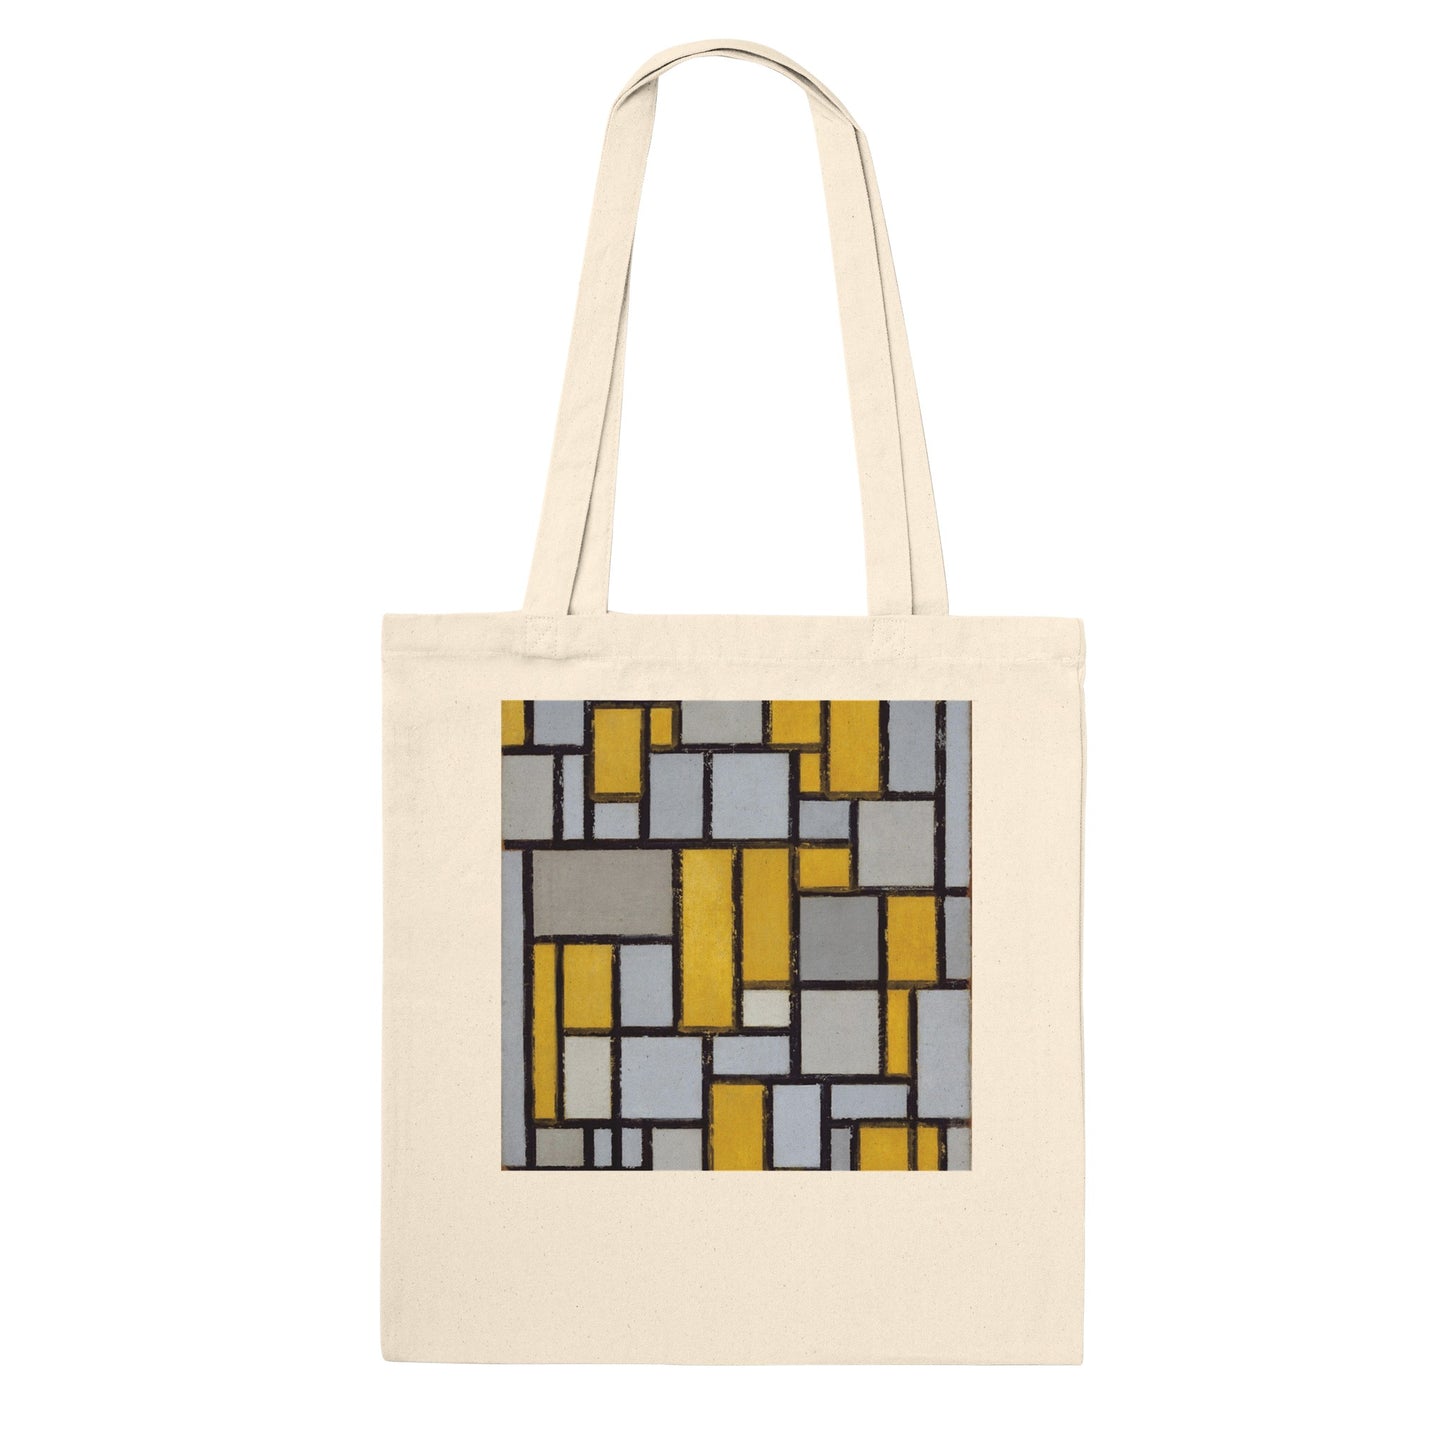 PIET MONDRIAN - COMPOSITION WITH GRID No. 1 (1918) - CLASSIC TOTE BAG